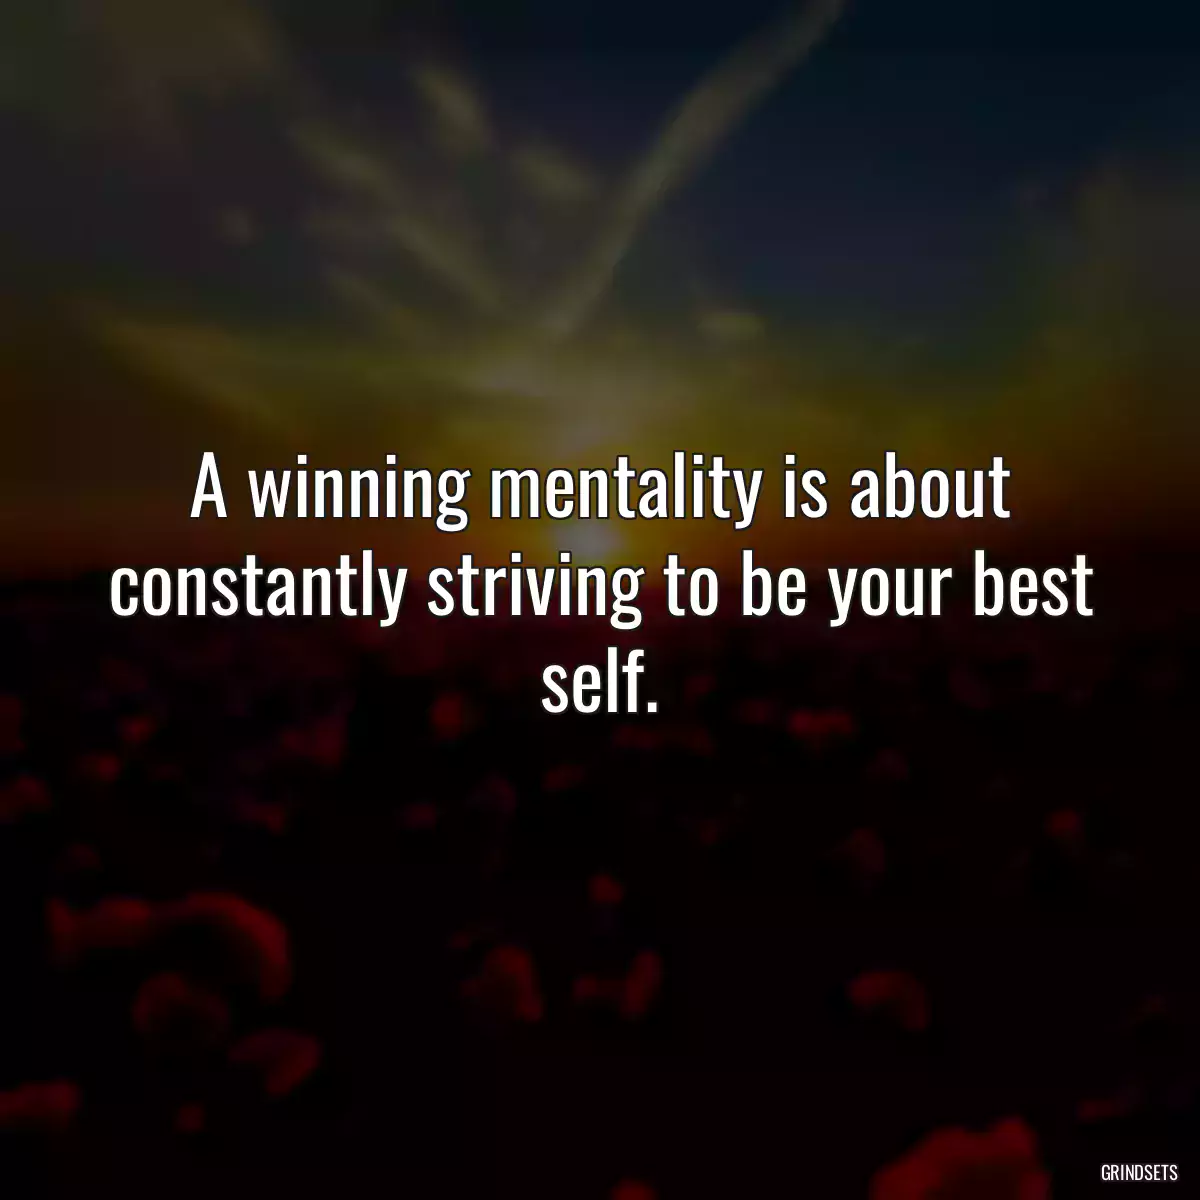 A winning mentality is about constantly striving to be your best self.